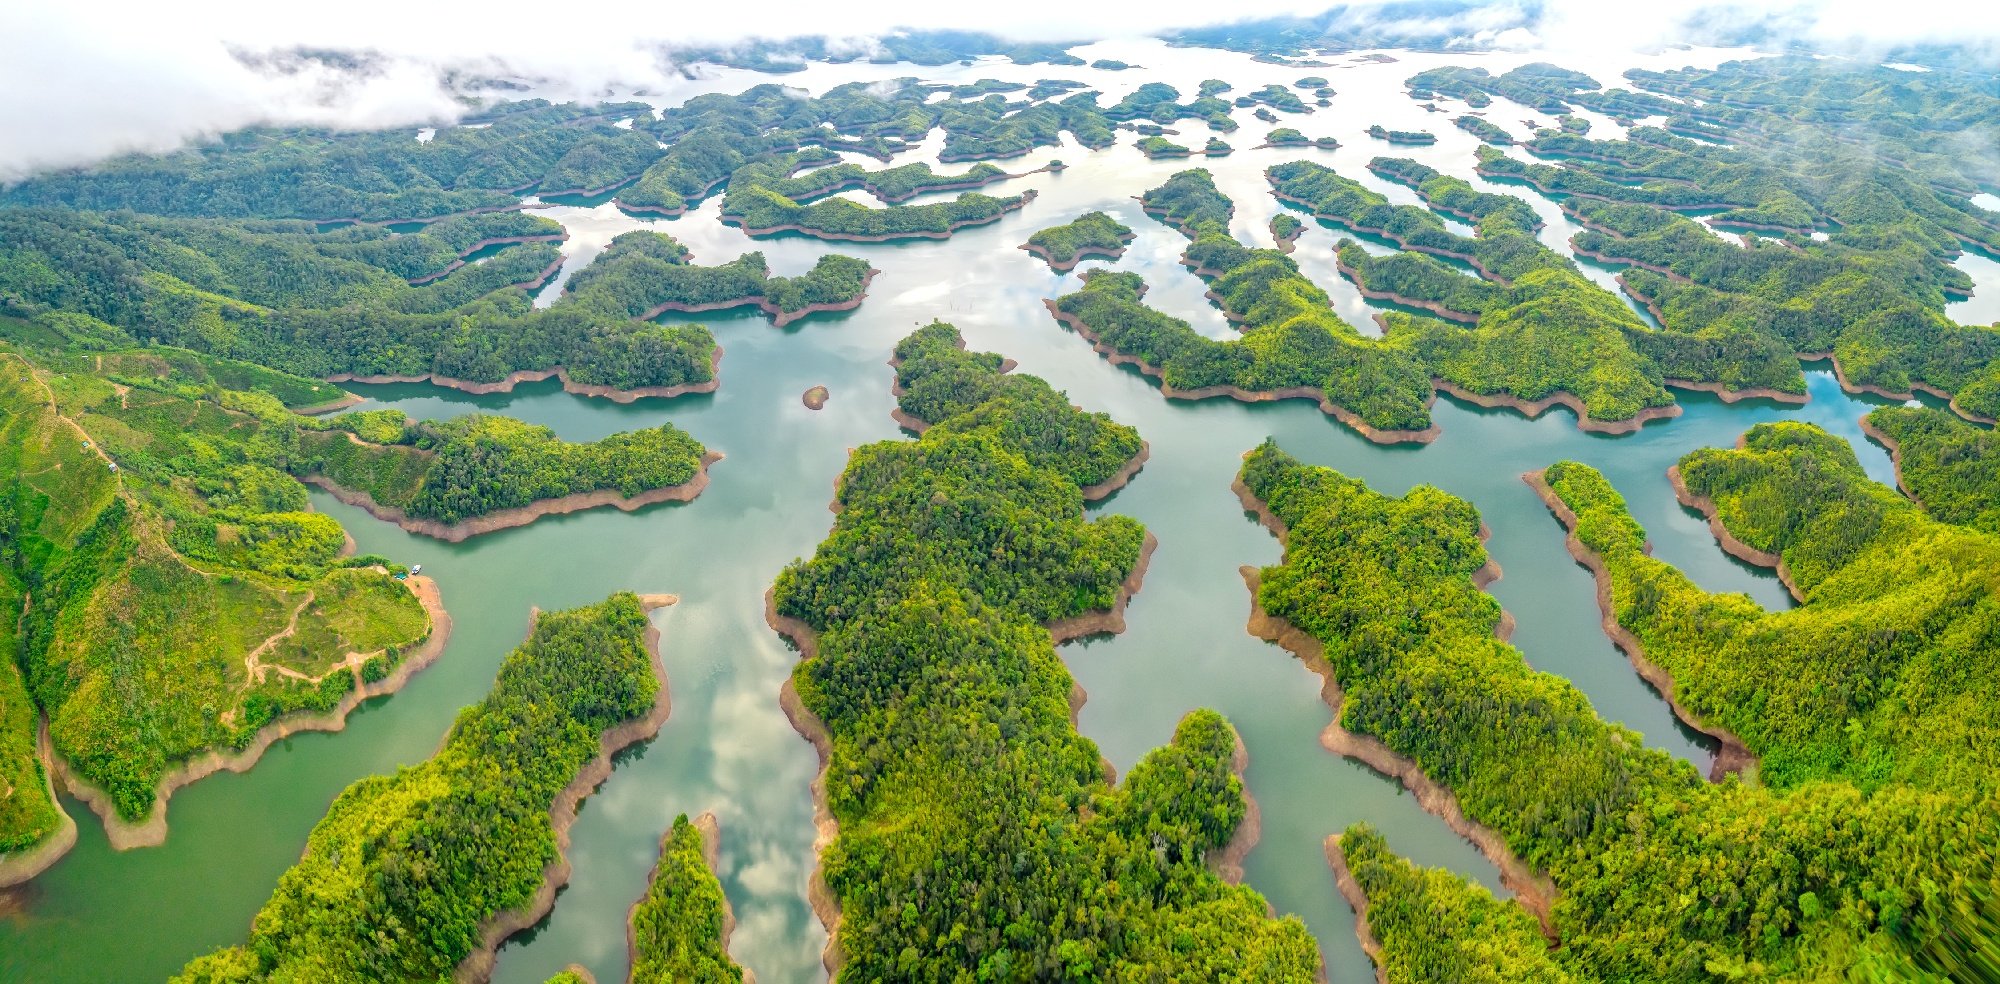 EXPLORE-VN: water quality information for Vietnam's inland & coastal waters